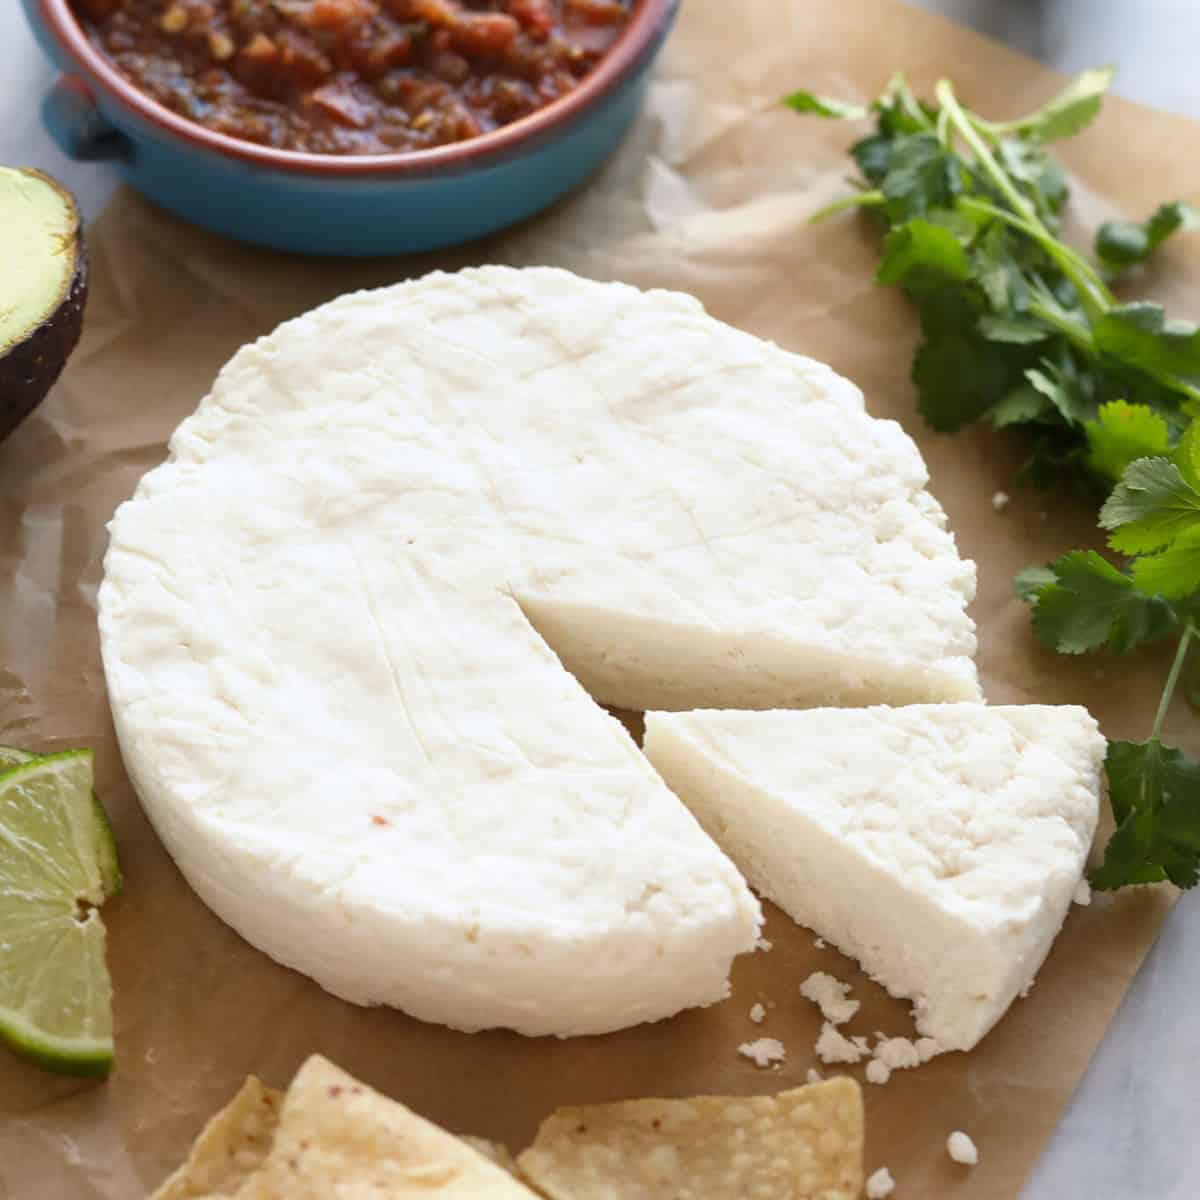 What Is Queso Fresco Cheese?